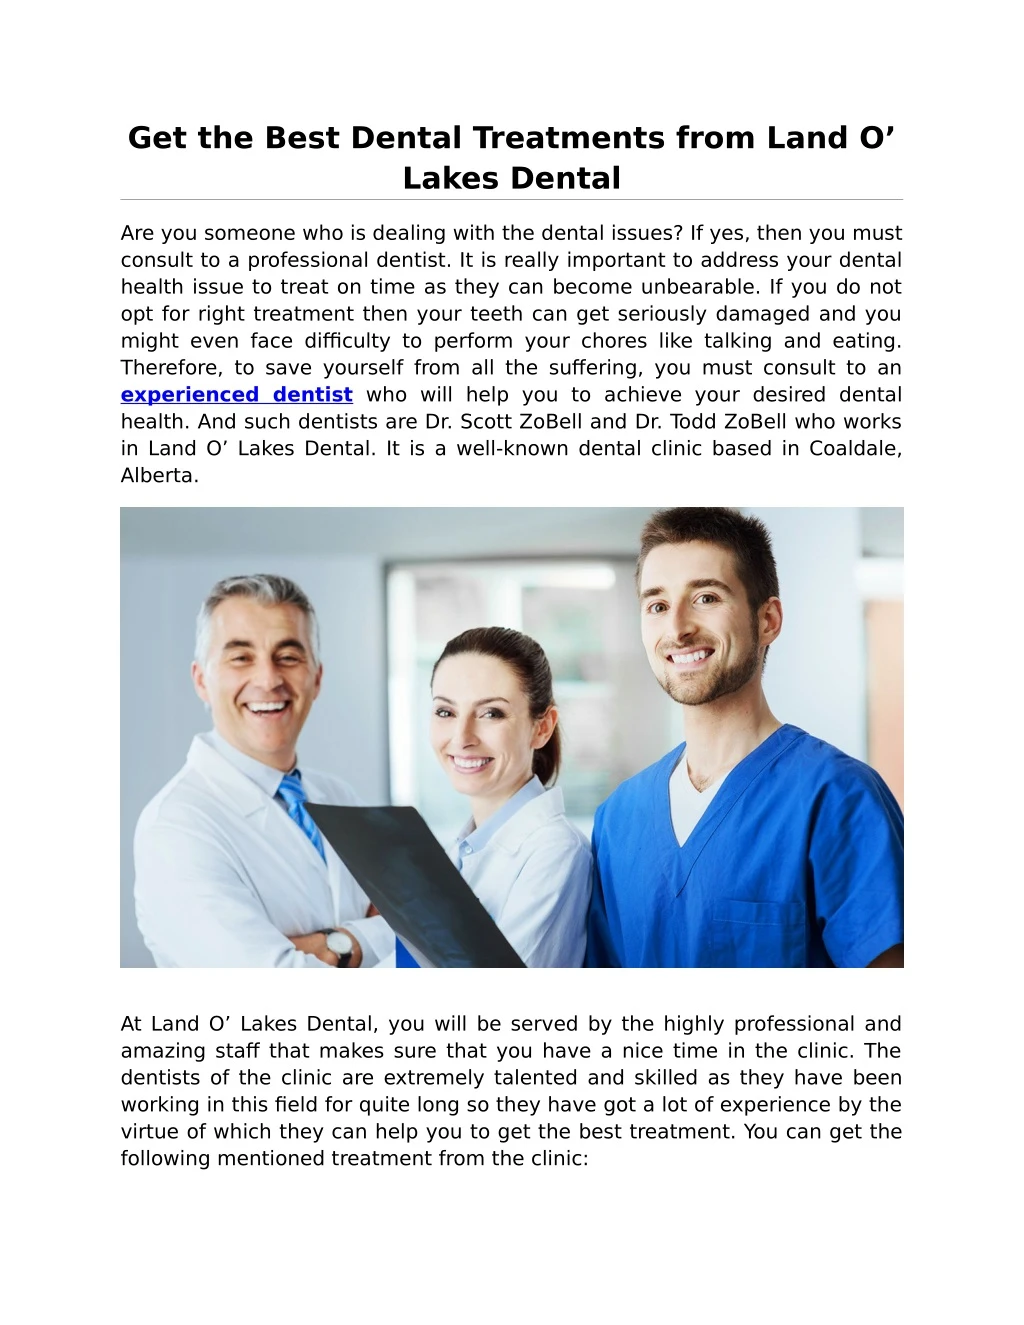 get the best dental treatments from land o lakes